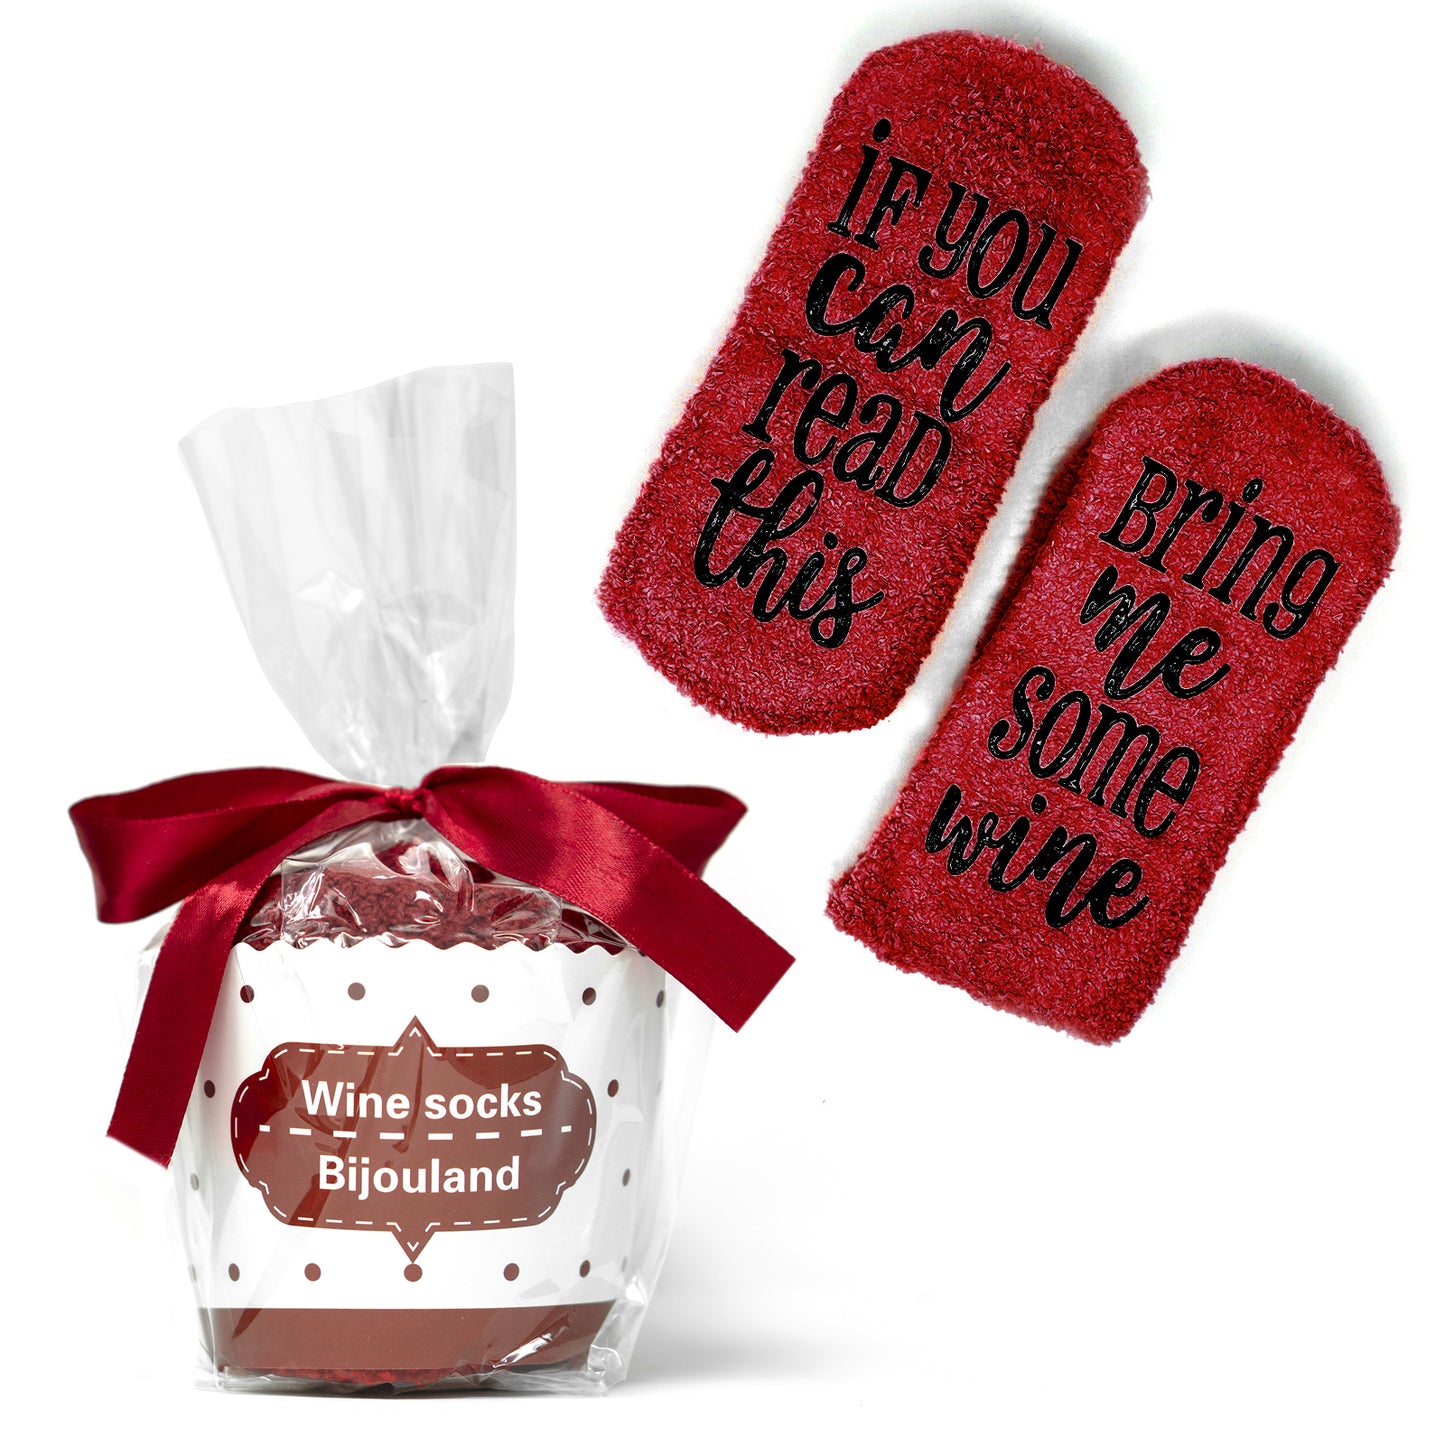 Bring Me Some Winе Socks - Gift for Mother’s Day With Cute Cupcake Package